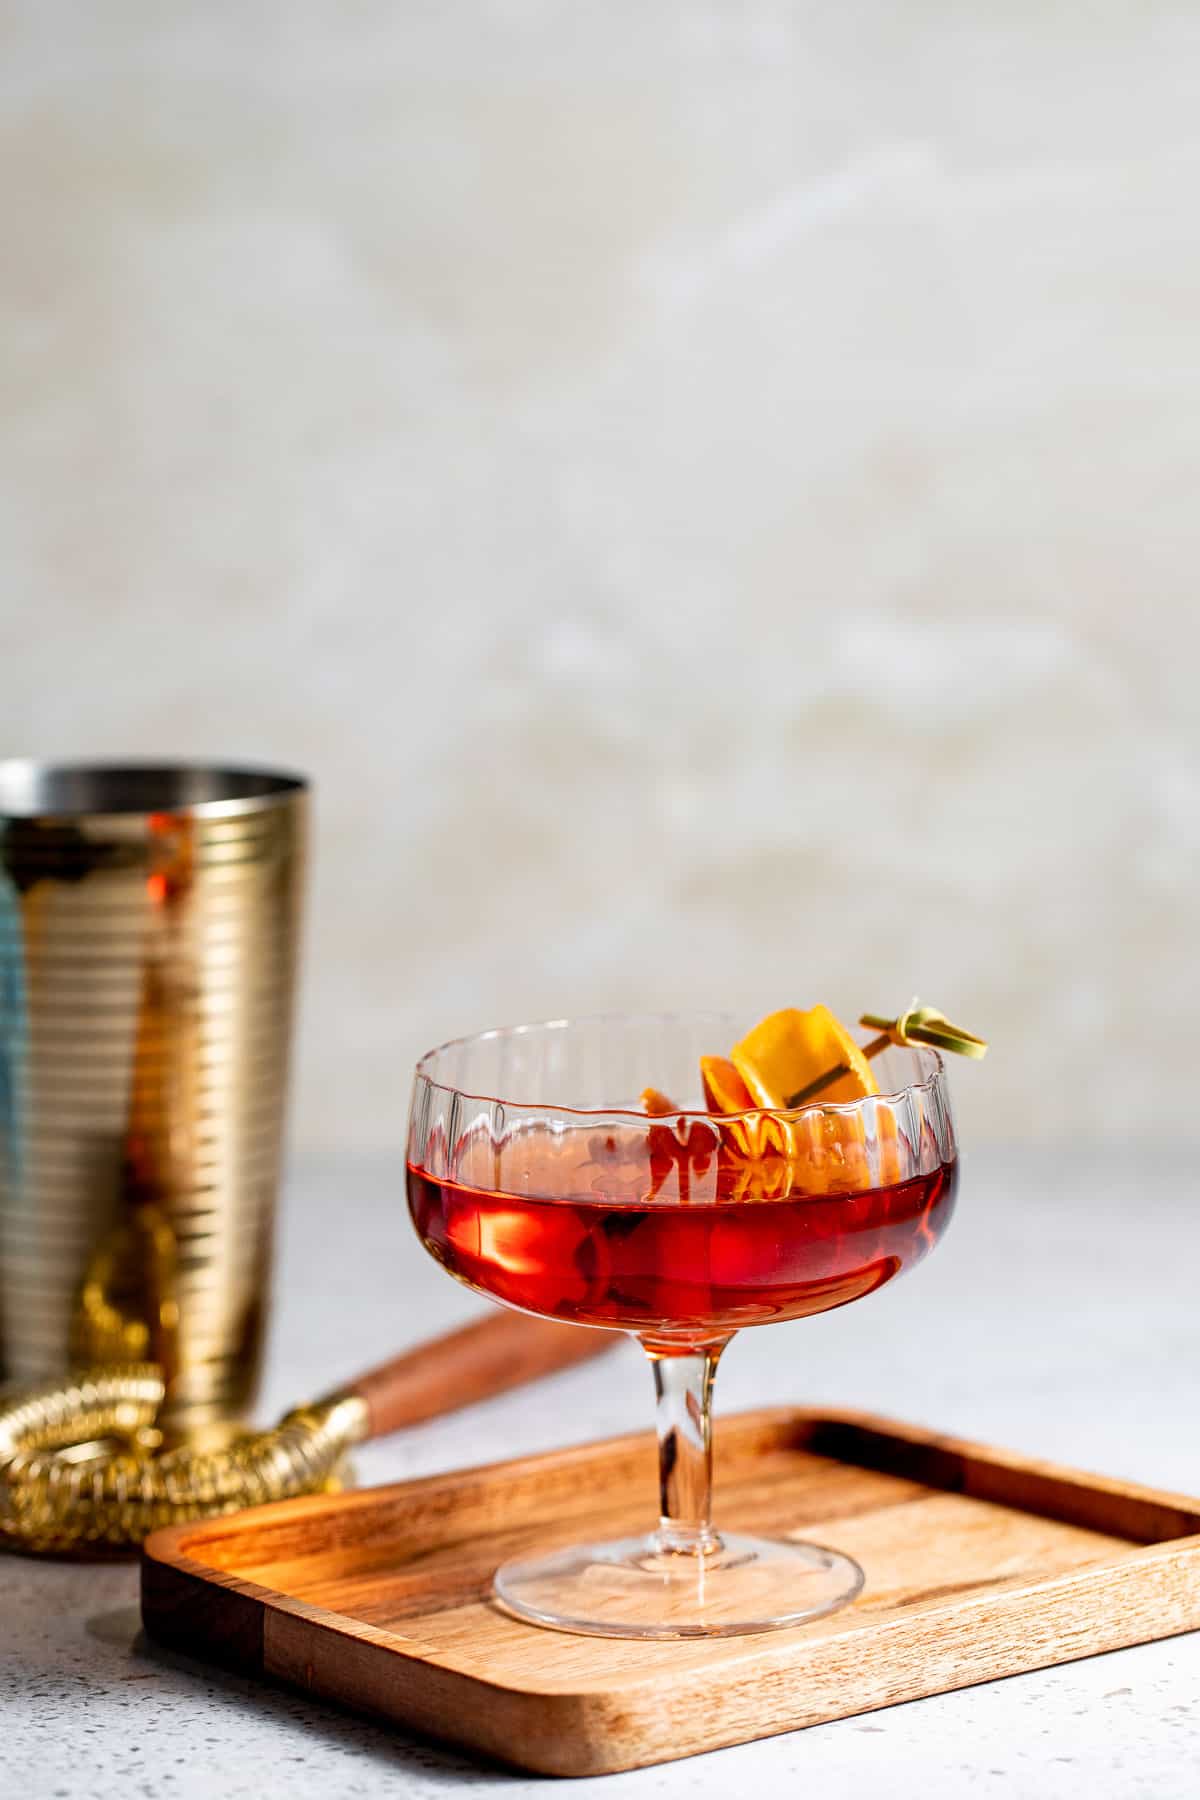 rob roy drink in coupe glass with orange rind